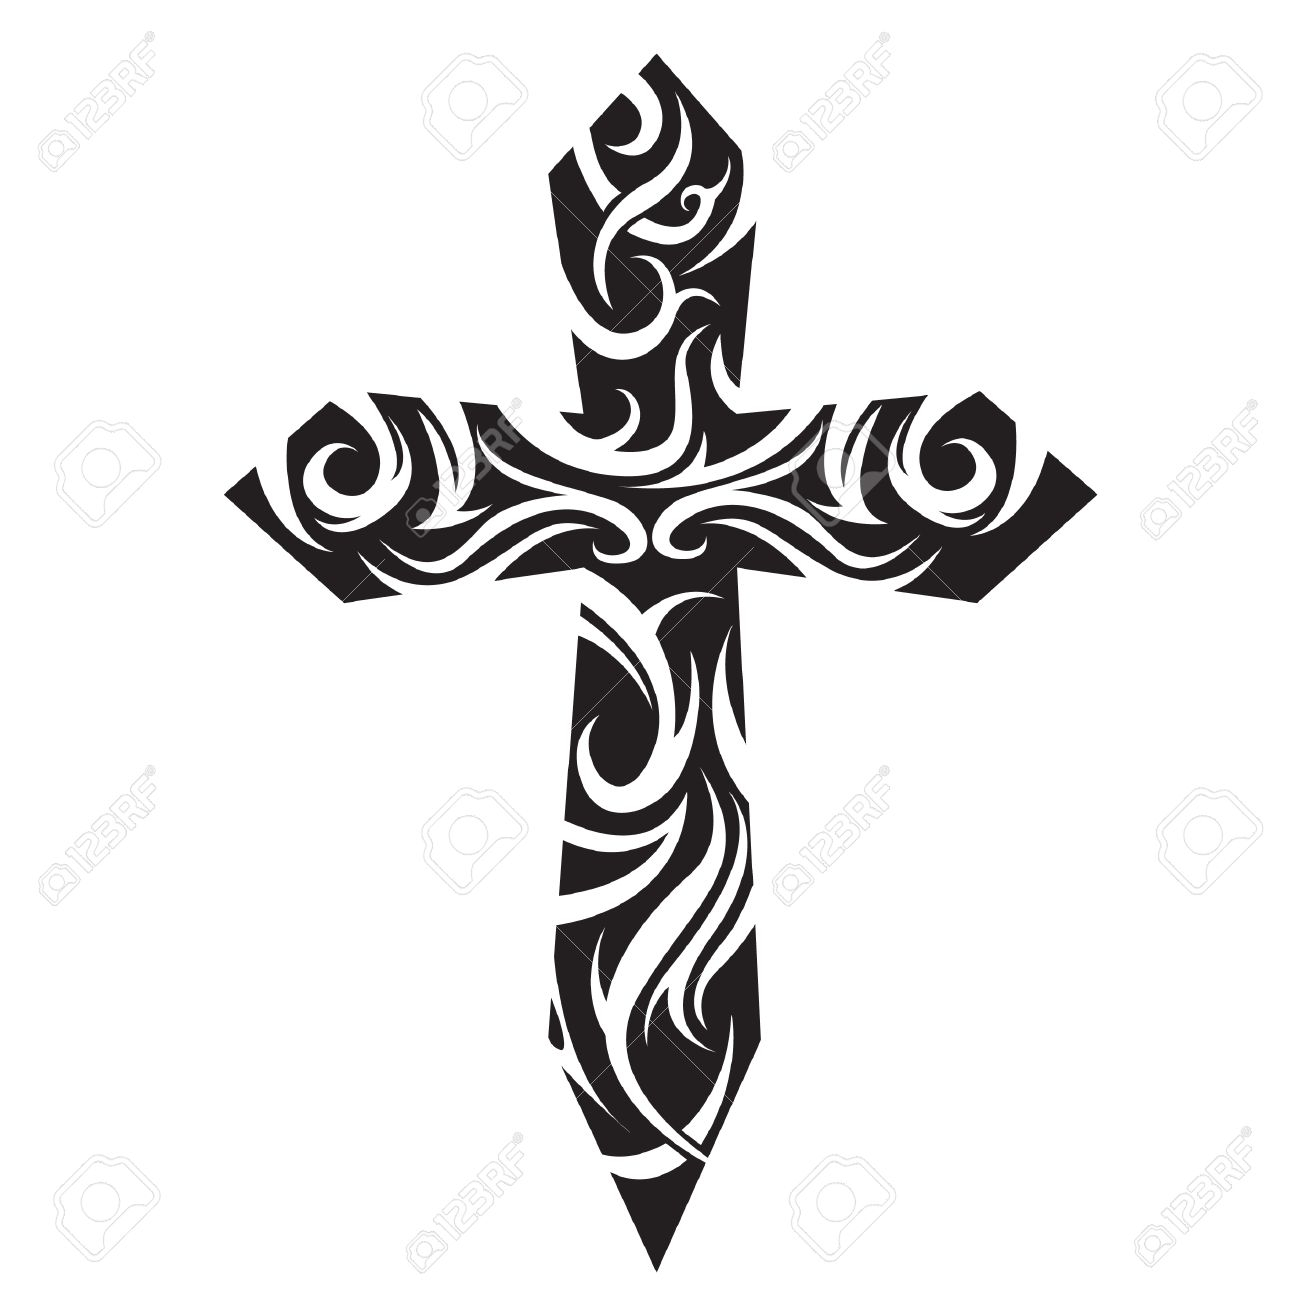 Tribal Cross Tattoo Royalty Free Cliparts Vectors And Stock inside proportions 1300 X 1300